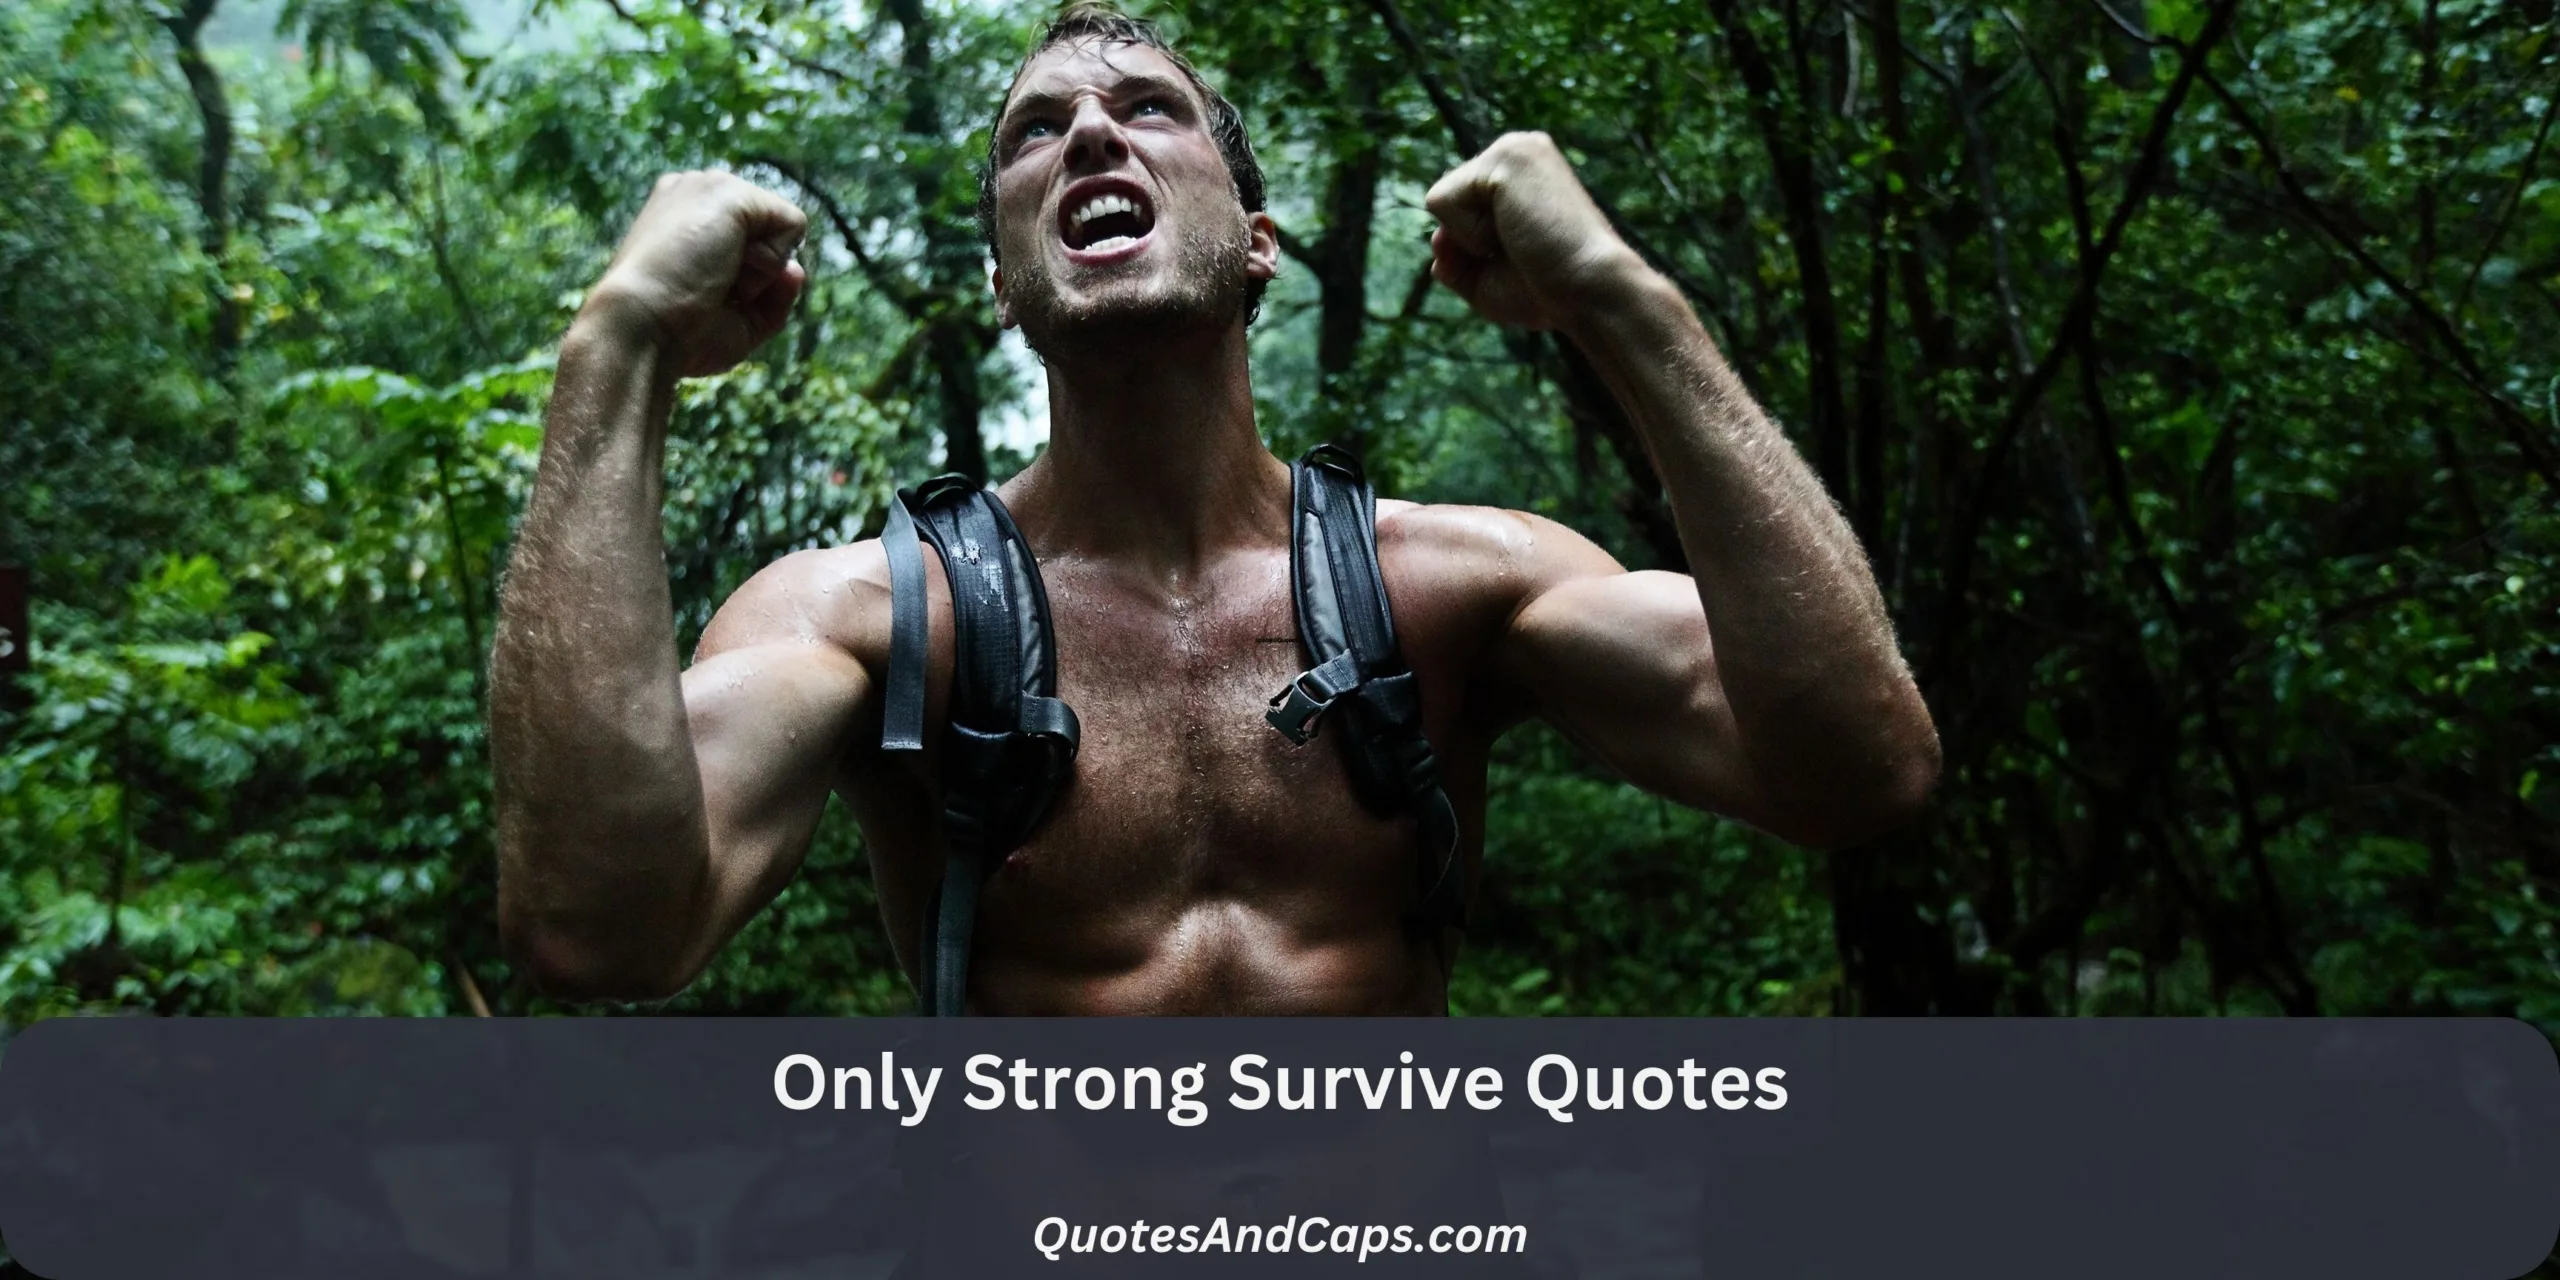 Only Strong Survive Quotes